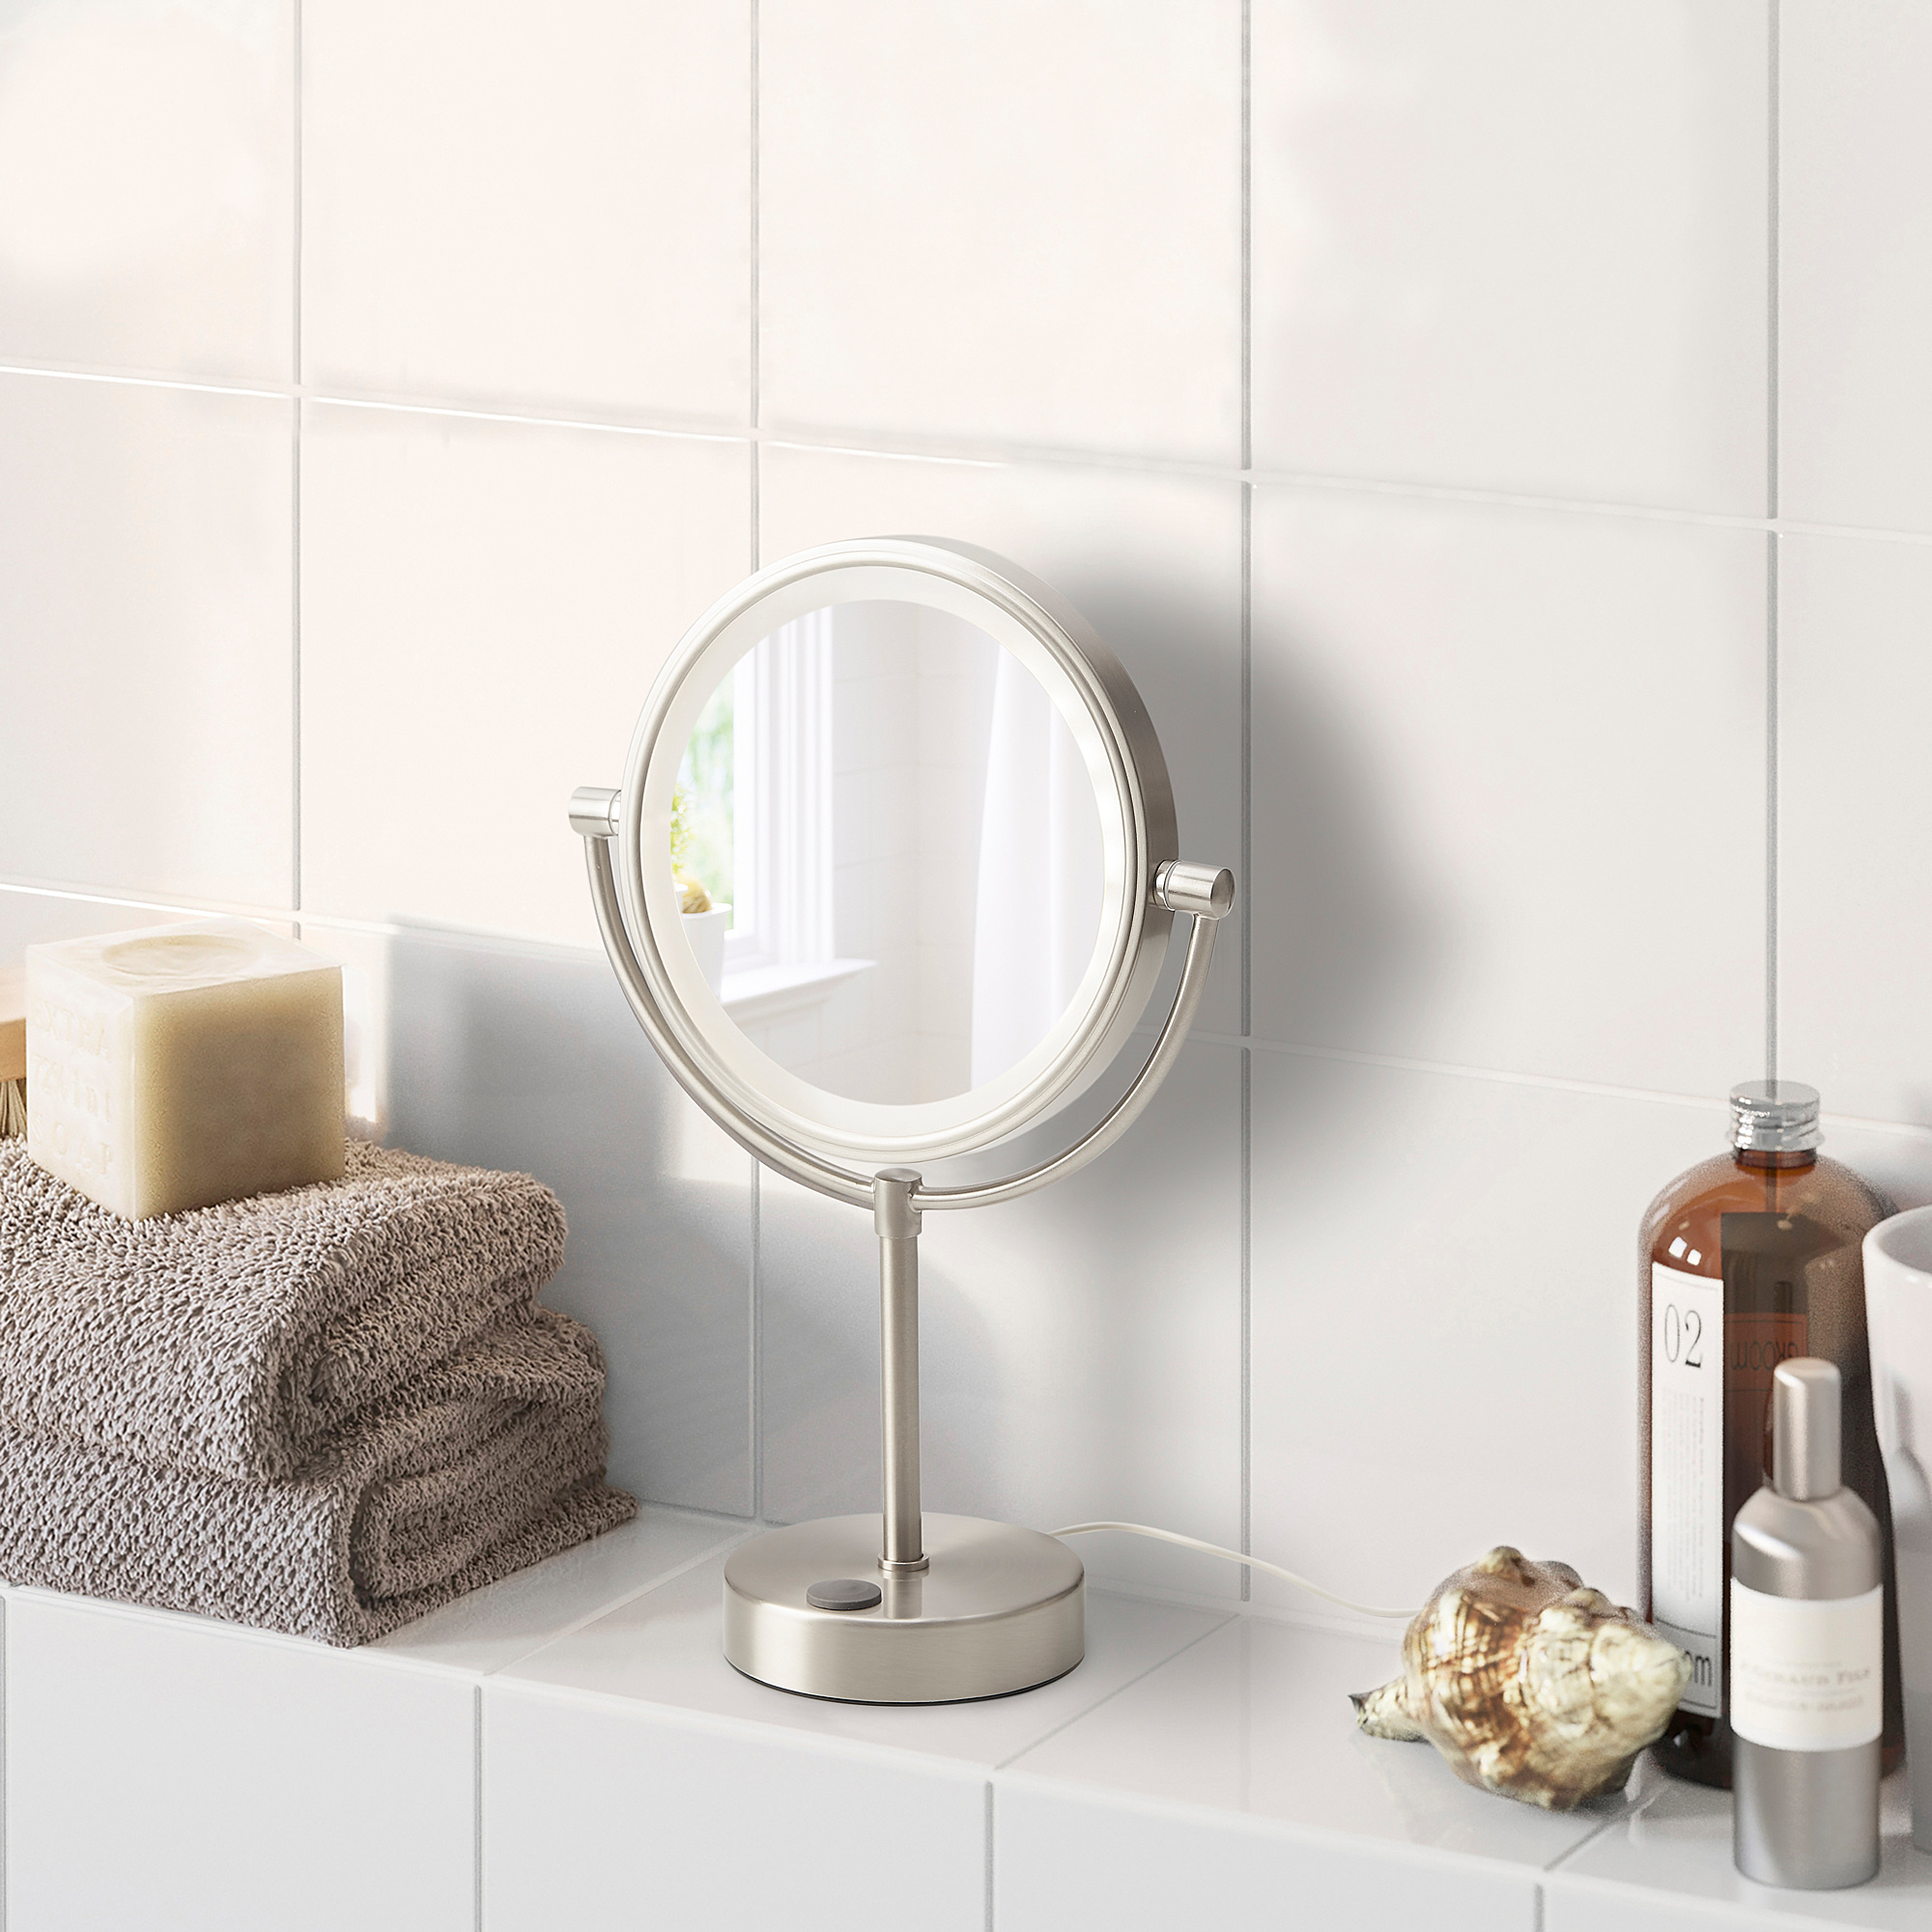 KAITUM mirror with integrated lighting